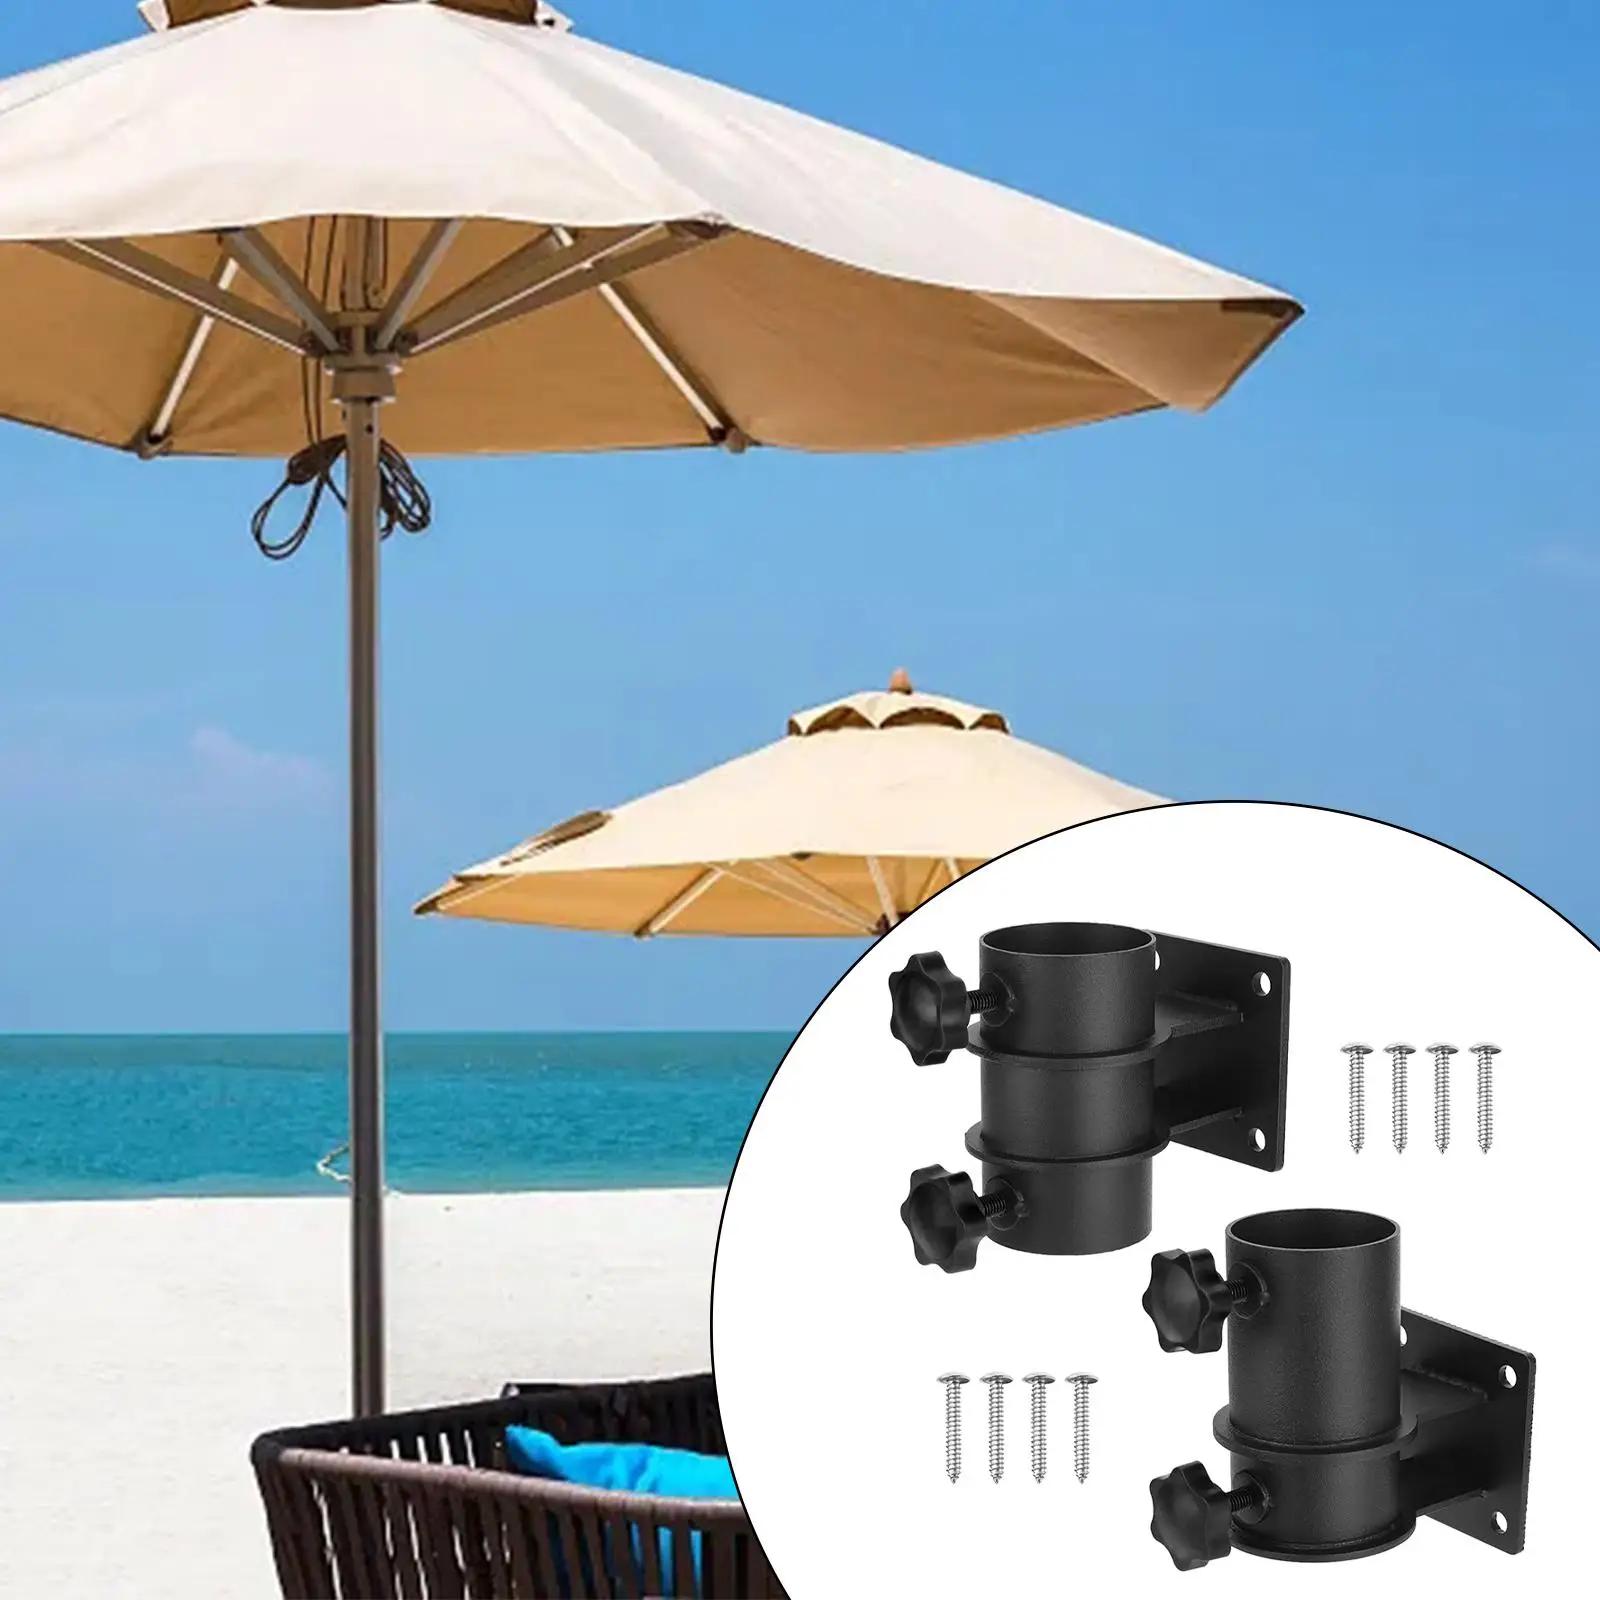 Umbrella Base Stand Fits 30mm-50mm Pole with Screws Sun Shelter Parasol Umbrella Mount for Docks Beach Outdoor Backyard Fittings